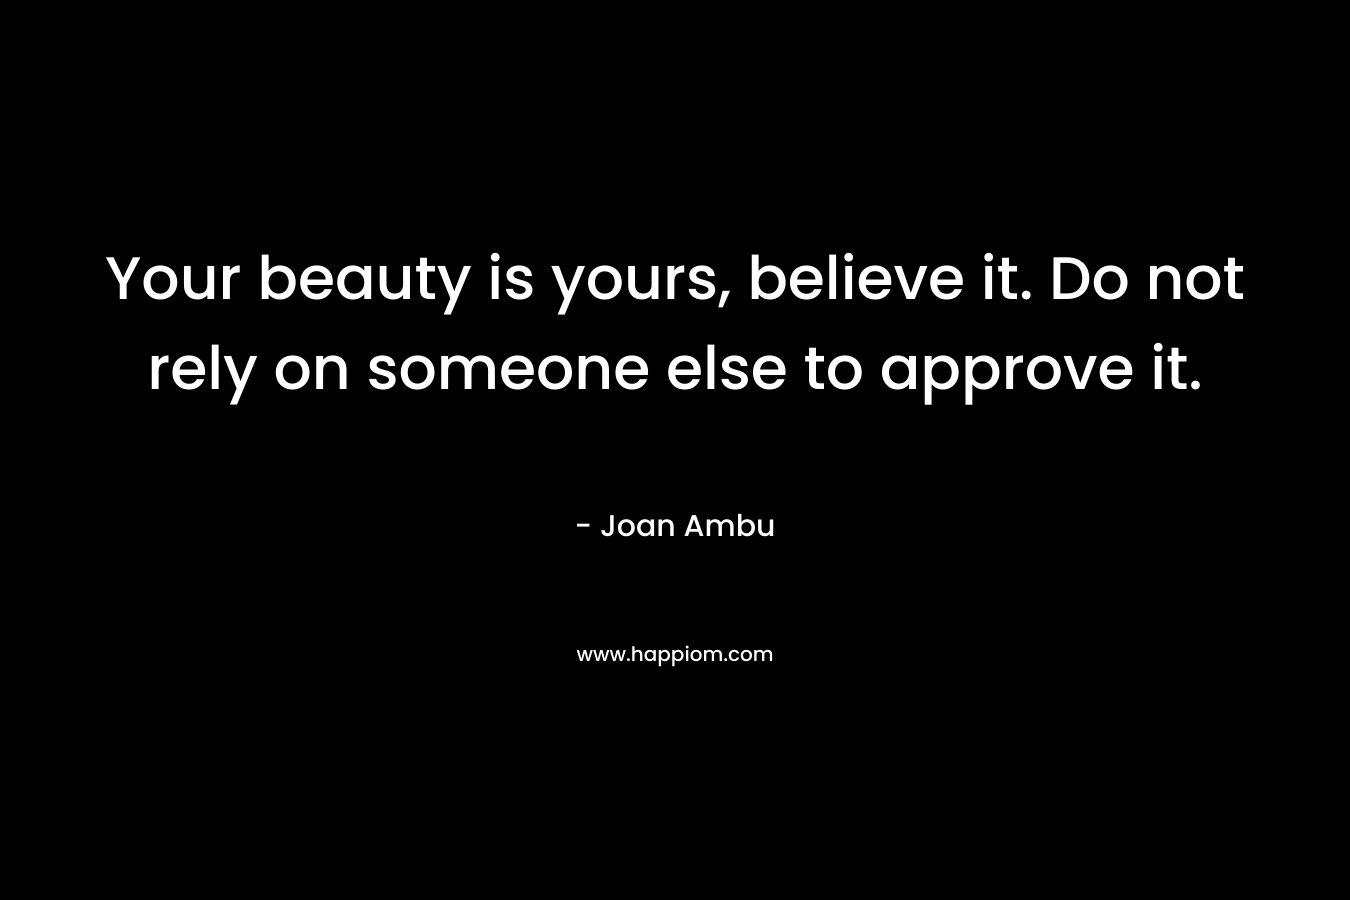 Your beauty is yours, believe it. Do not rely on someone else to approve it. – Joan Ambu